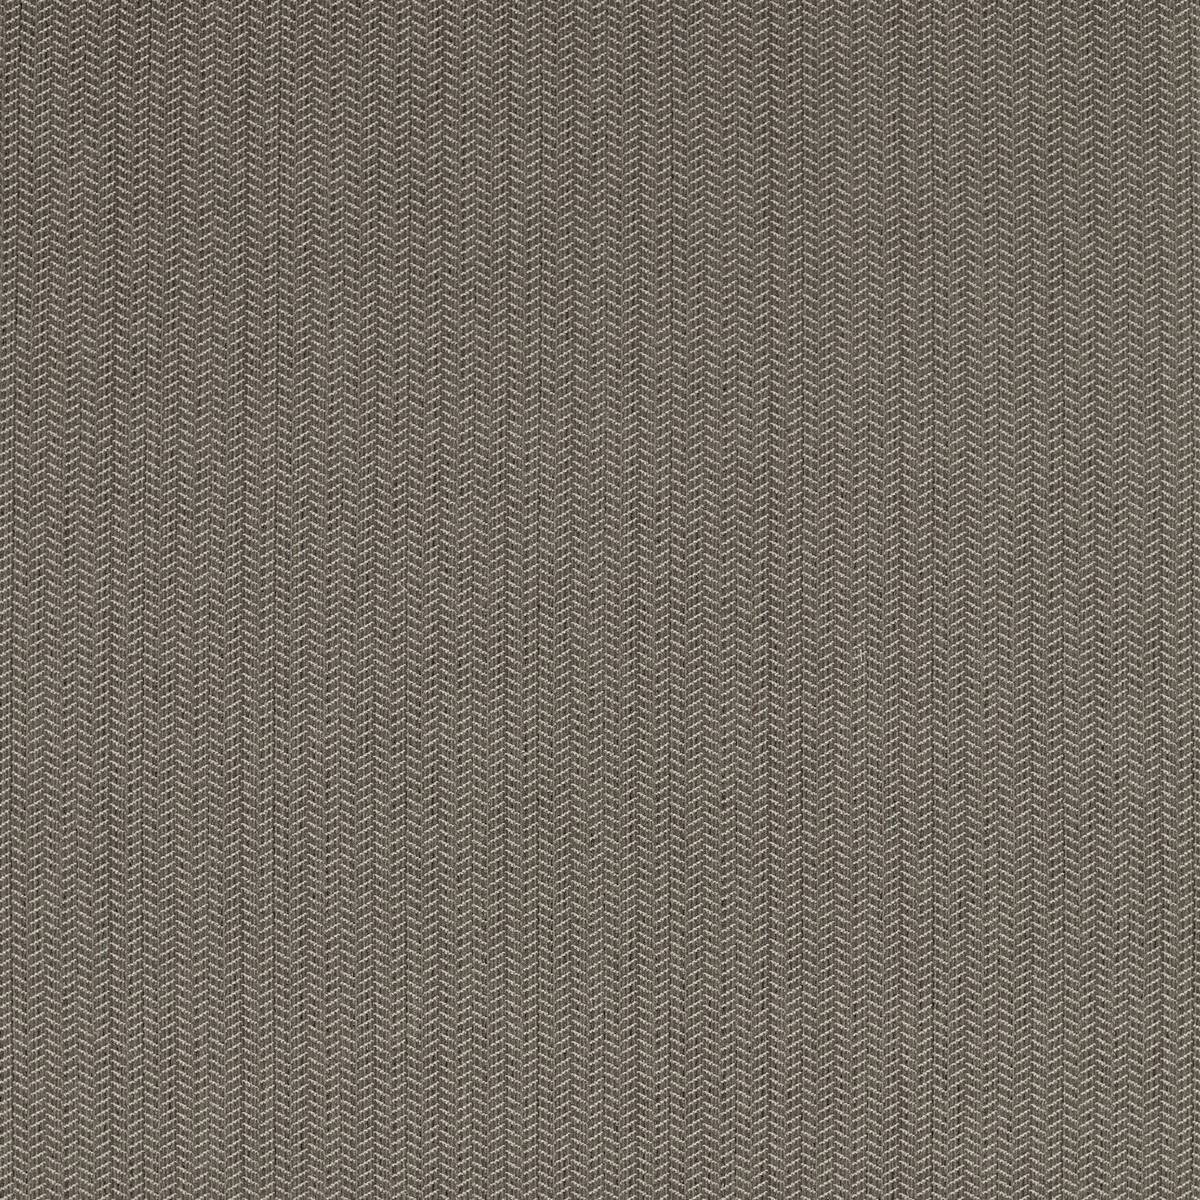 Dune Charcoal Fabric by Sanderson